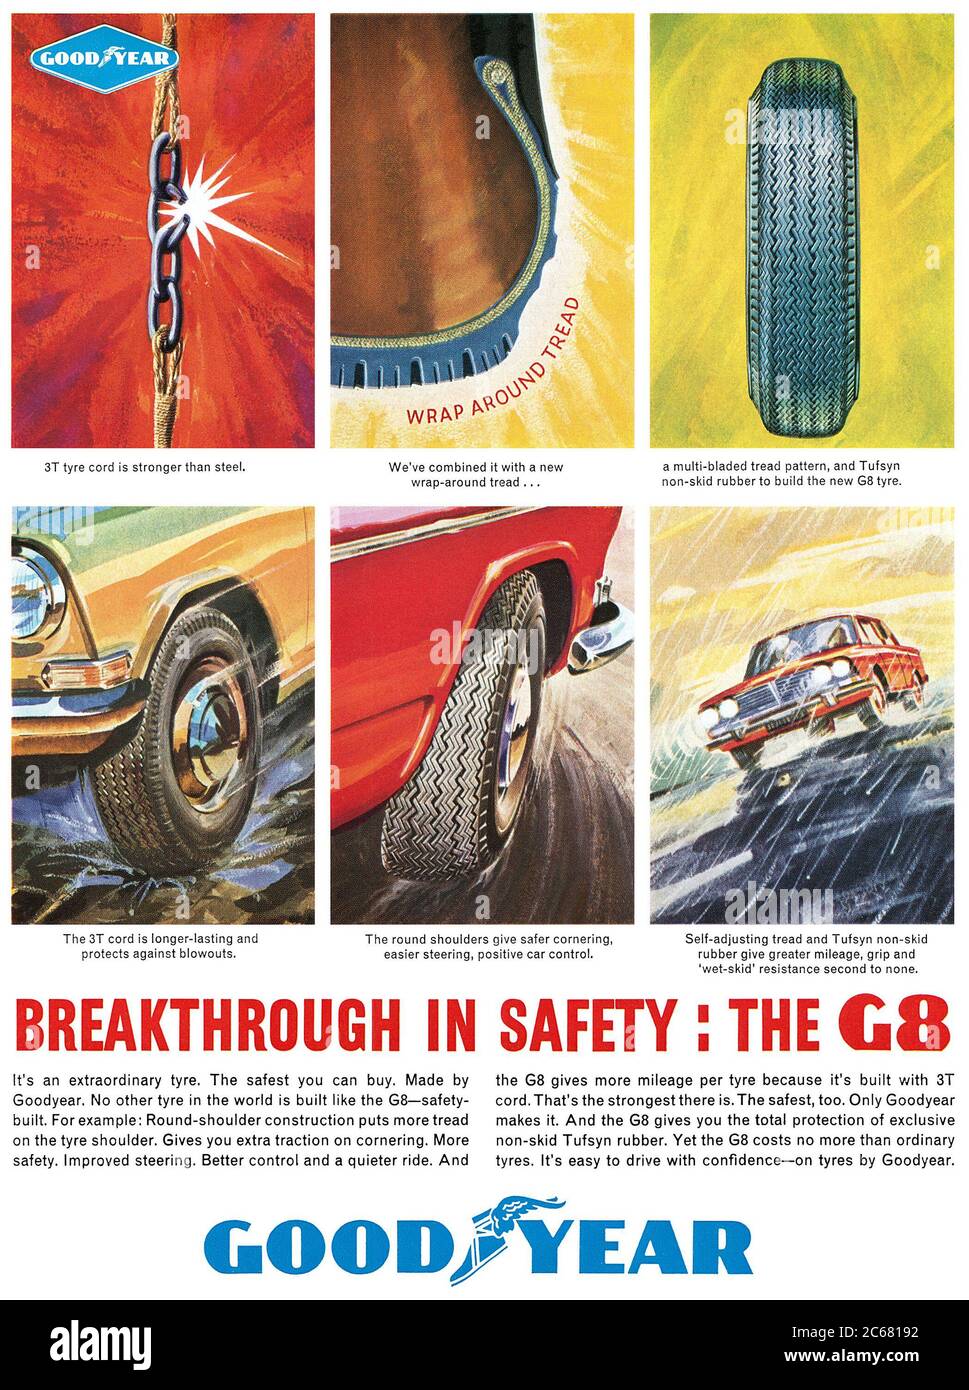 1965 British advertisement for Goodyear tyres. Stock Photo